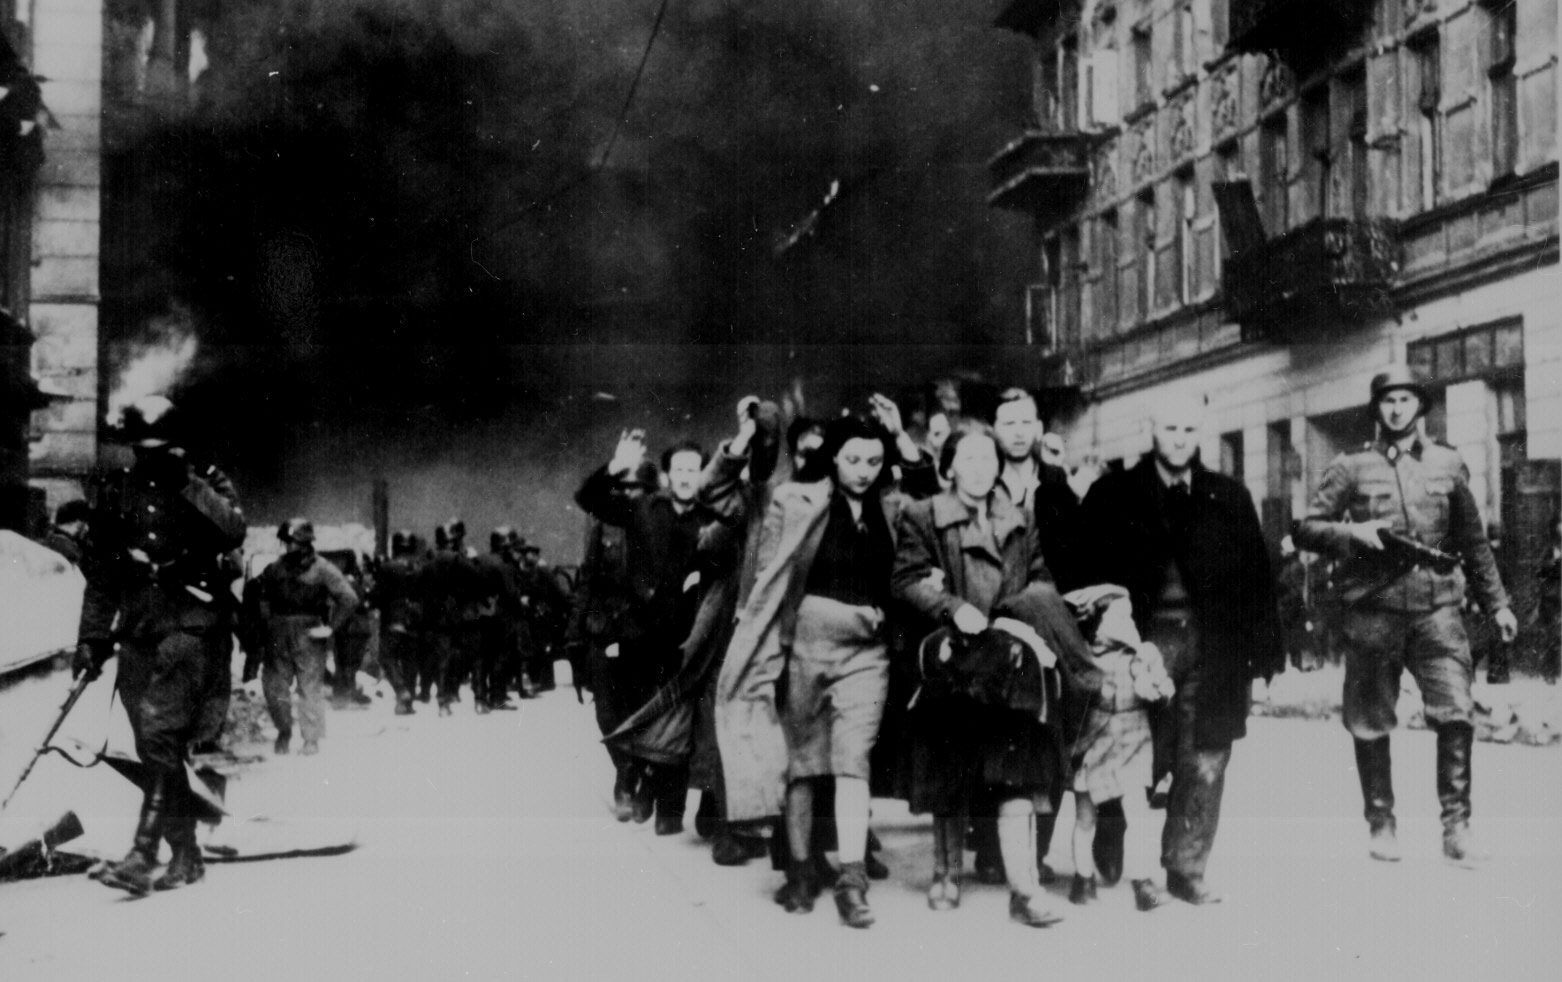 Jewish civilians rounded up during the destruction of the Warsaw Ghetto, Poland, Apr-May 1943